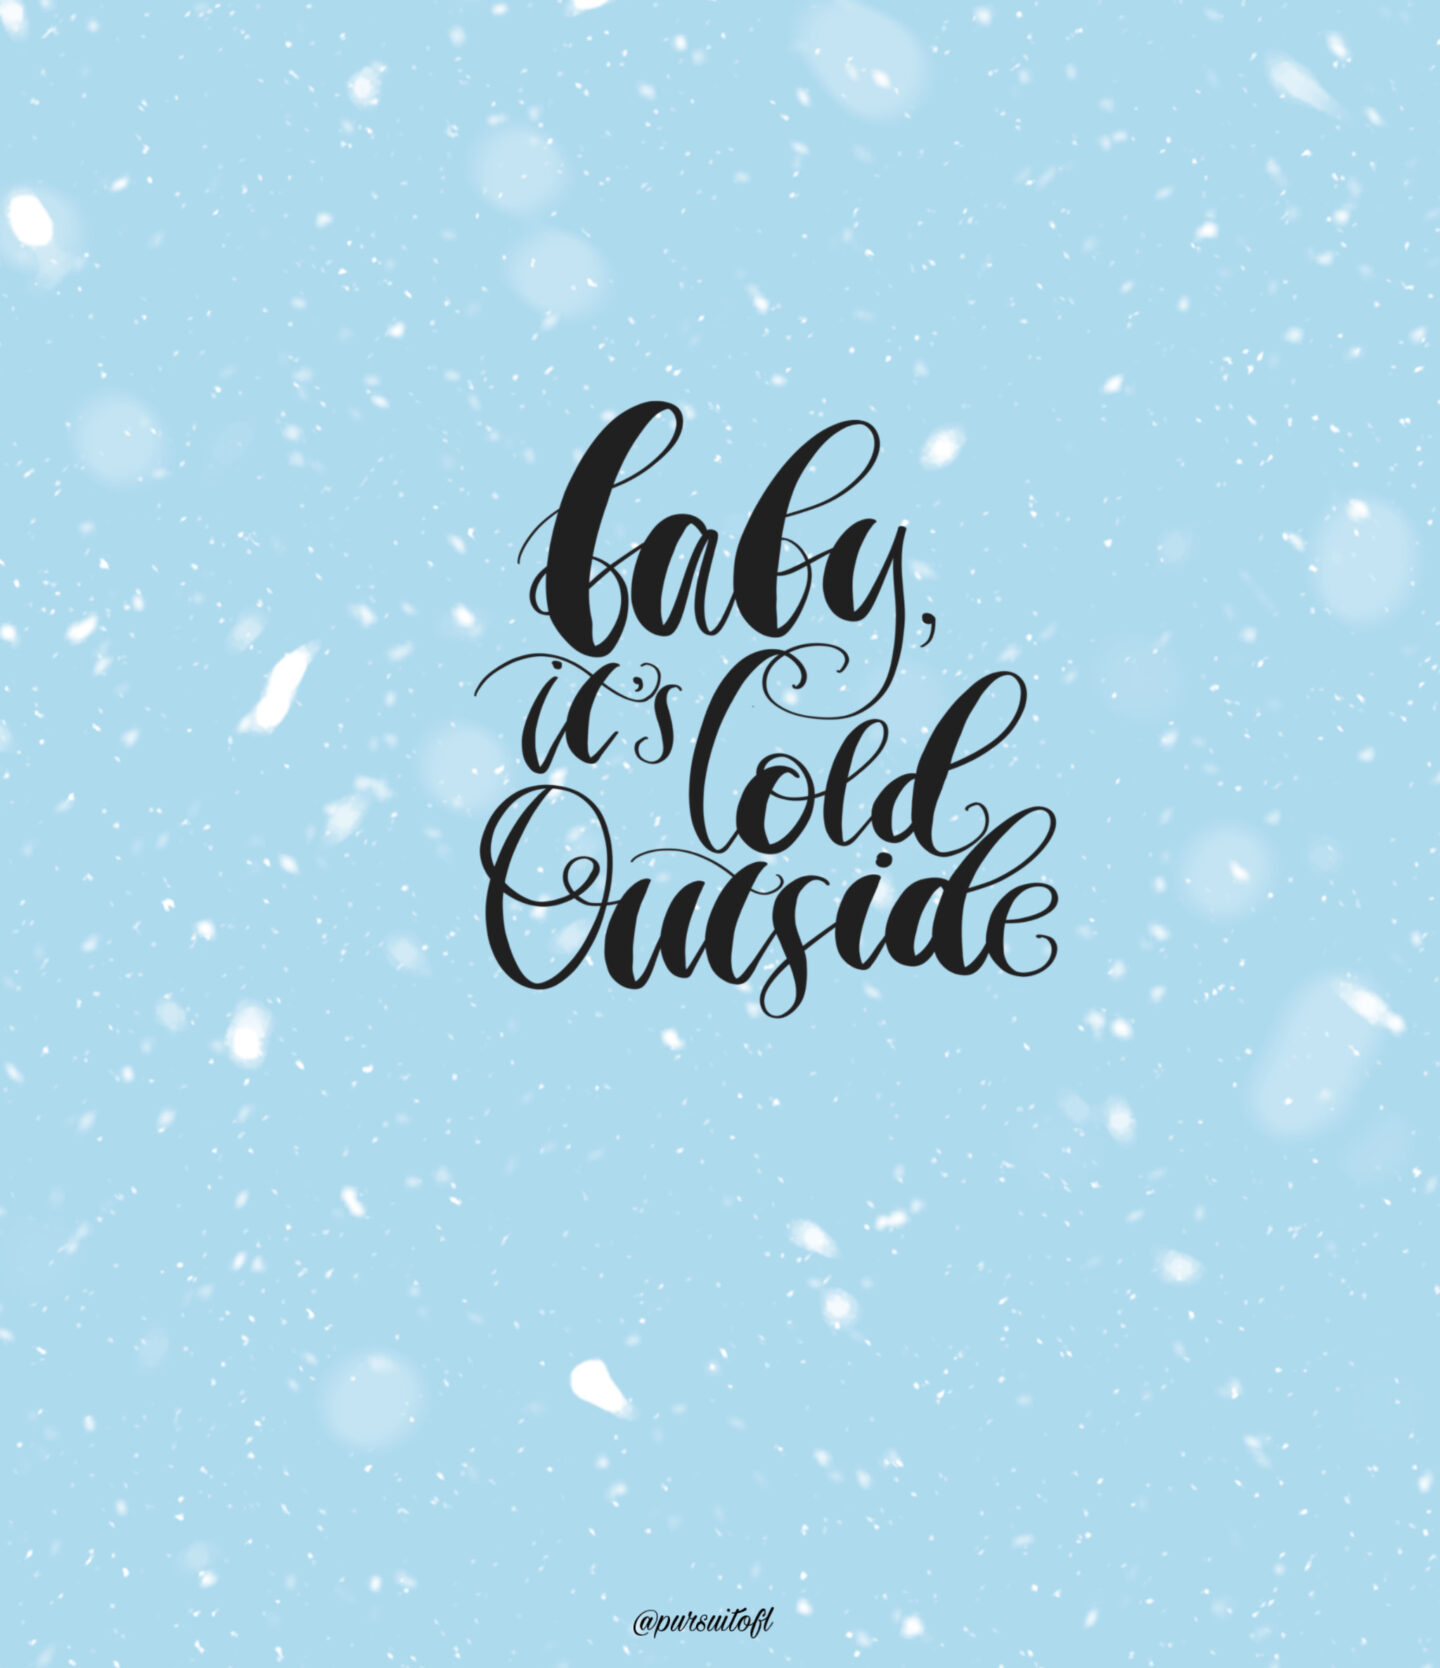 Light Blue Tablet Wallpaper with White Snow and Baby It's Cold Outside Text